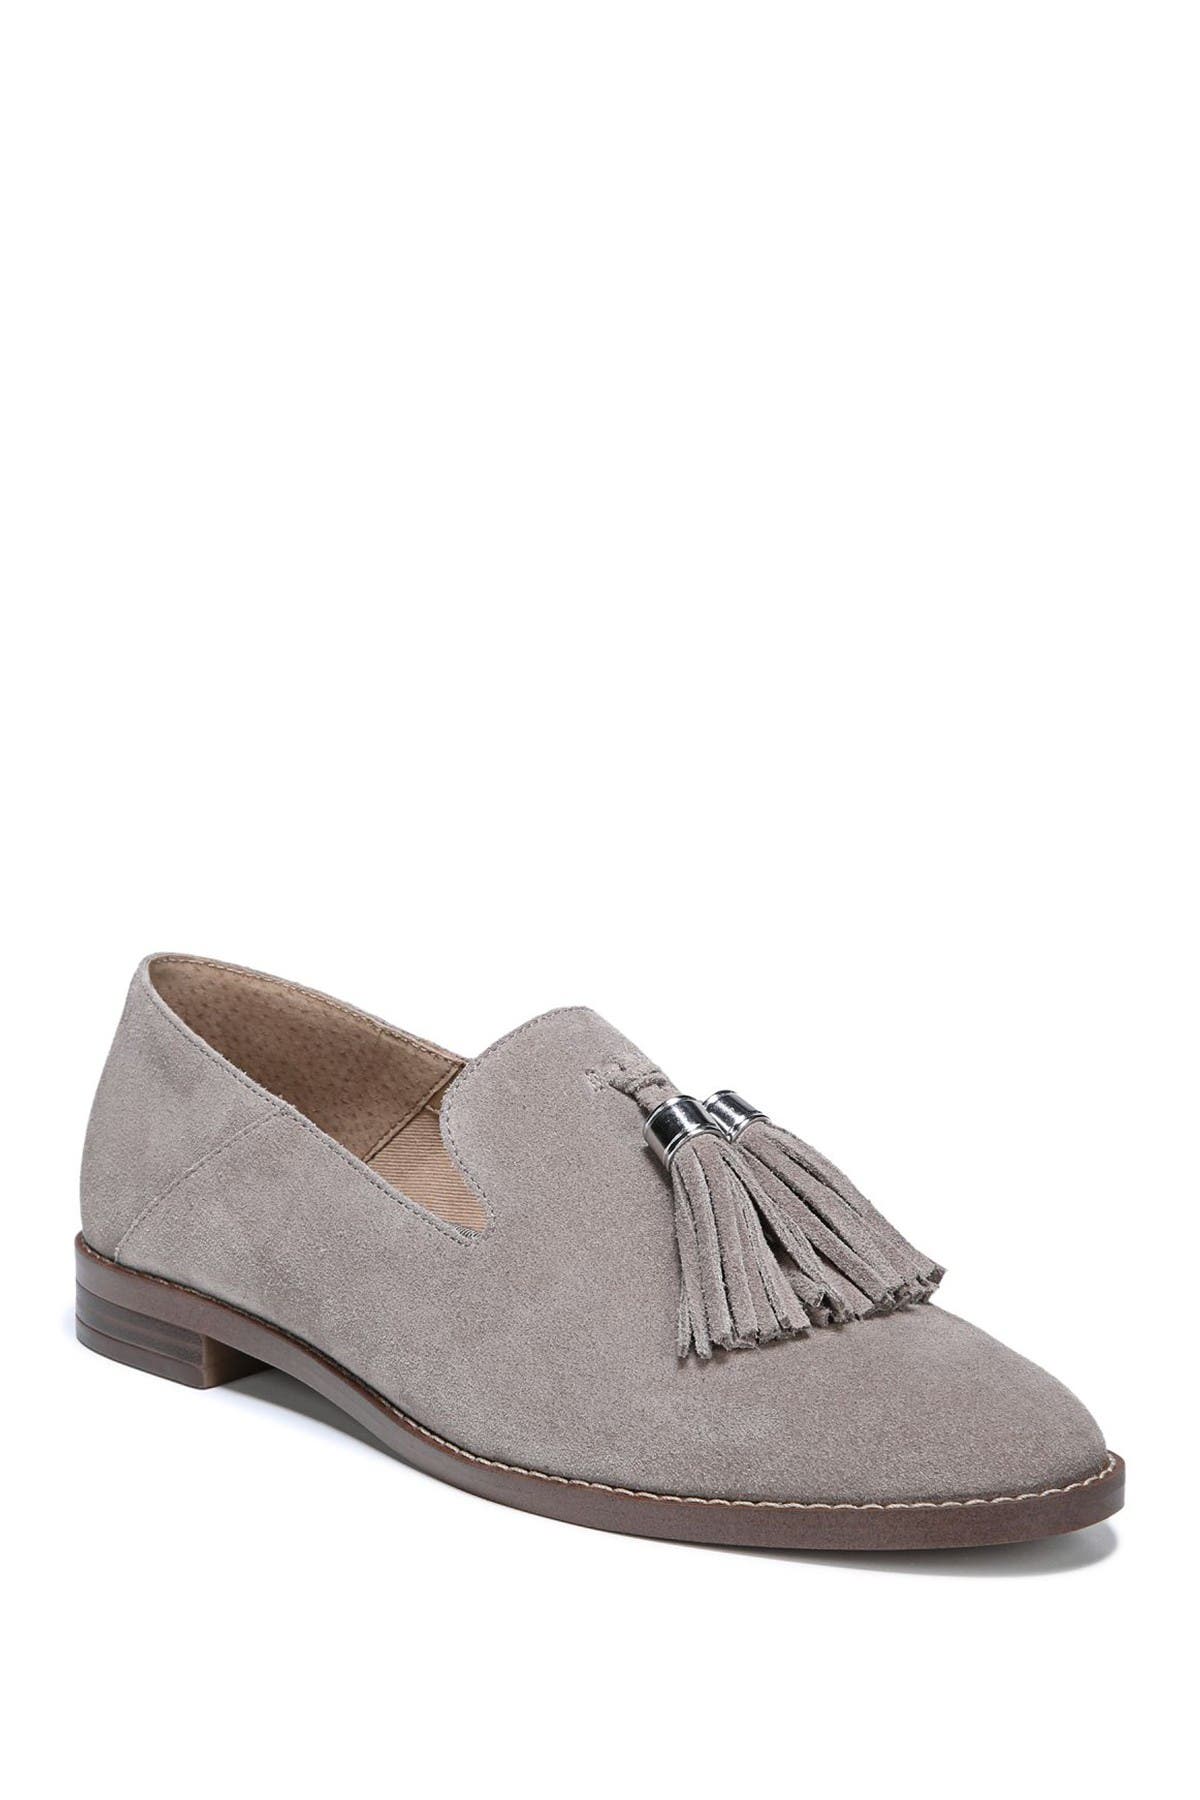 franco sarto suede loafers with keeper